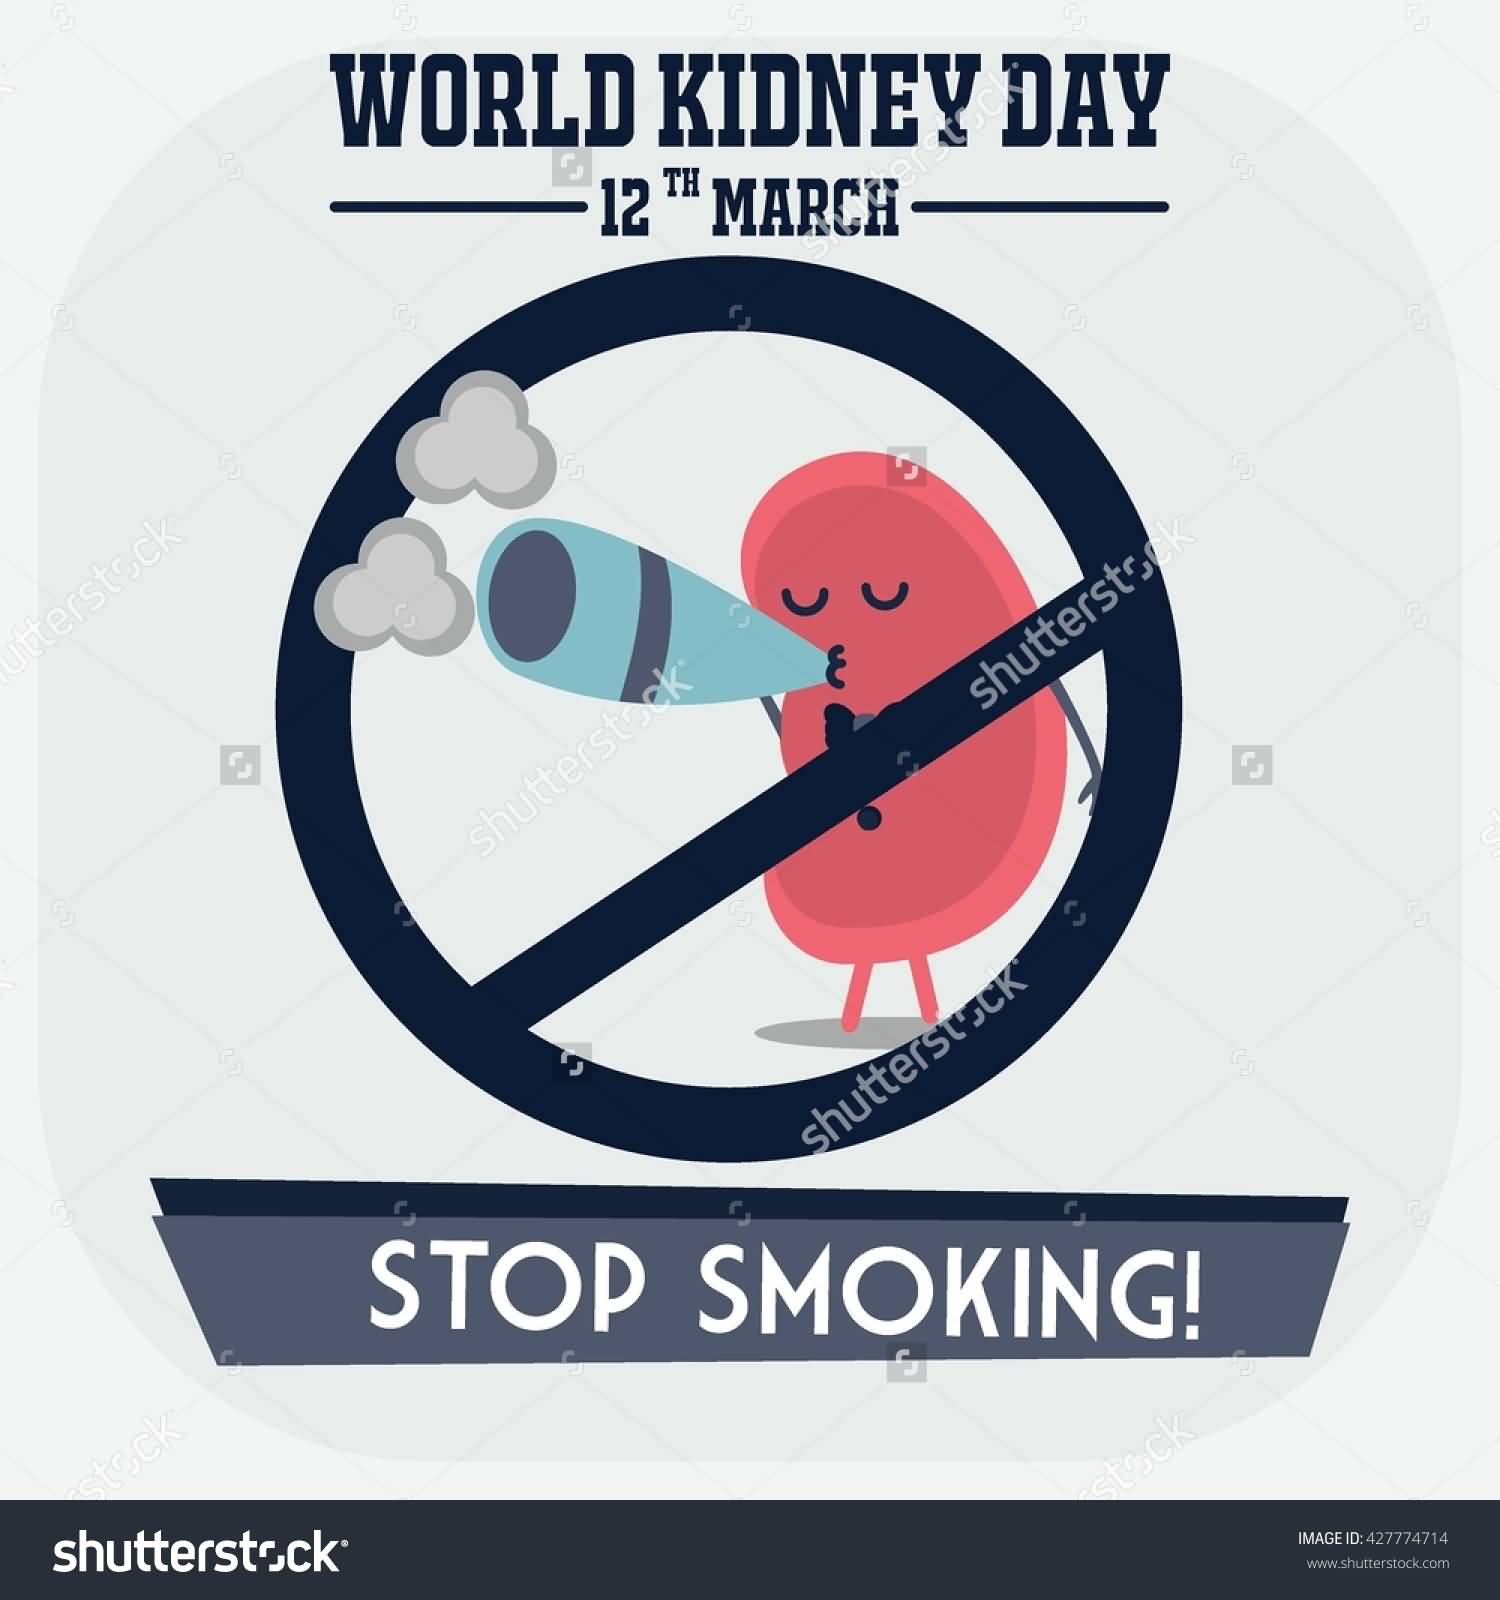 World Kidney Day 12th March Stop Smoking Illustration